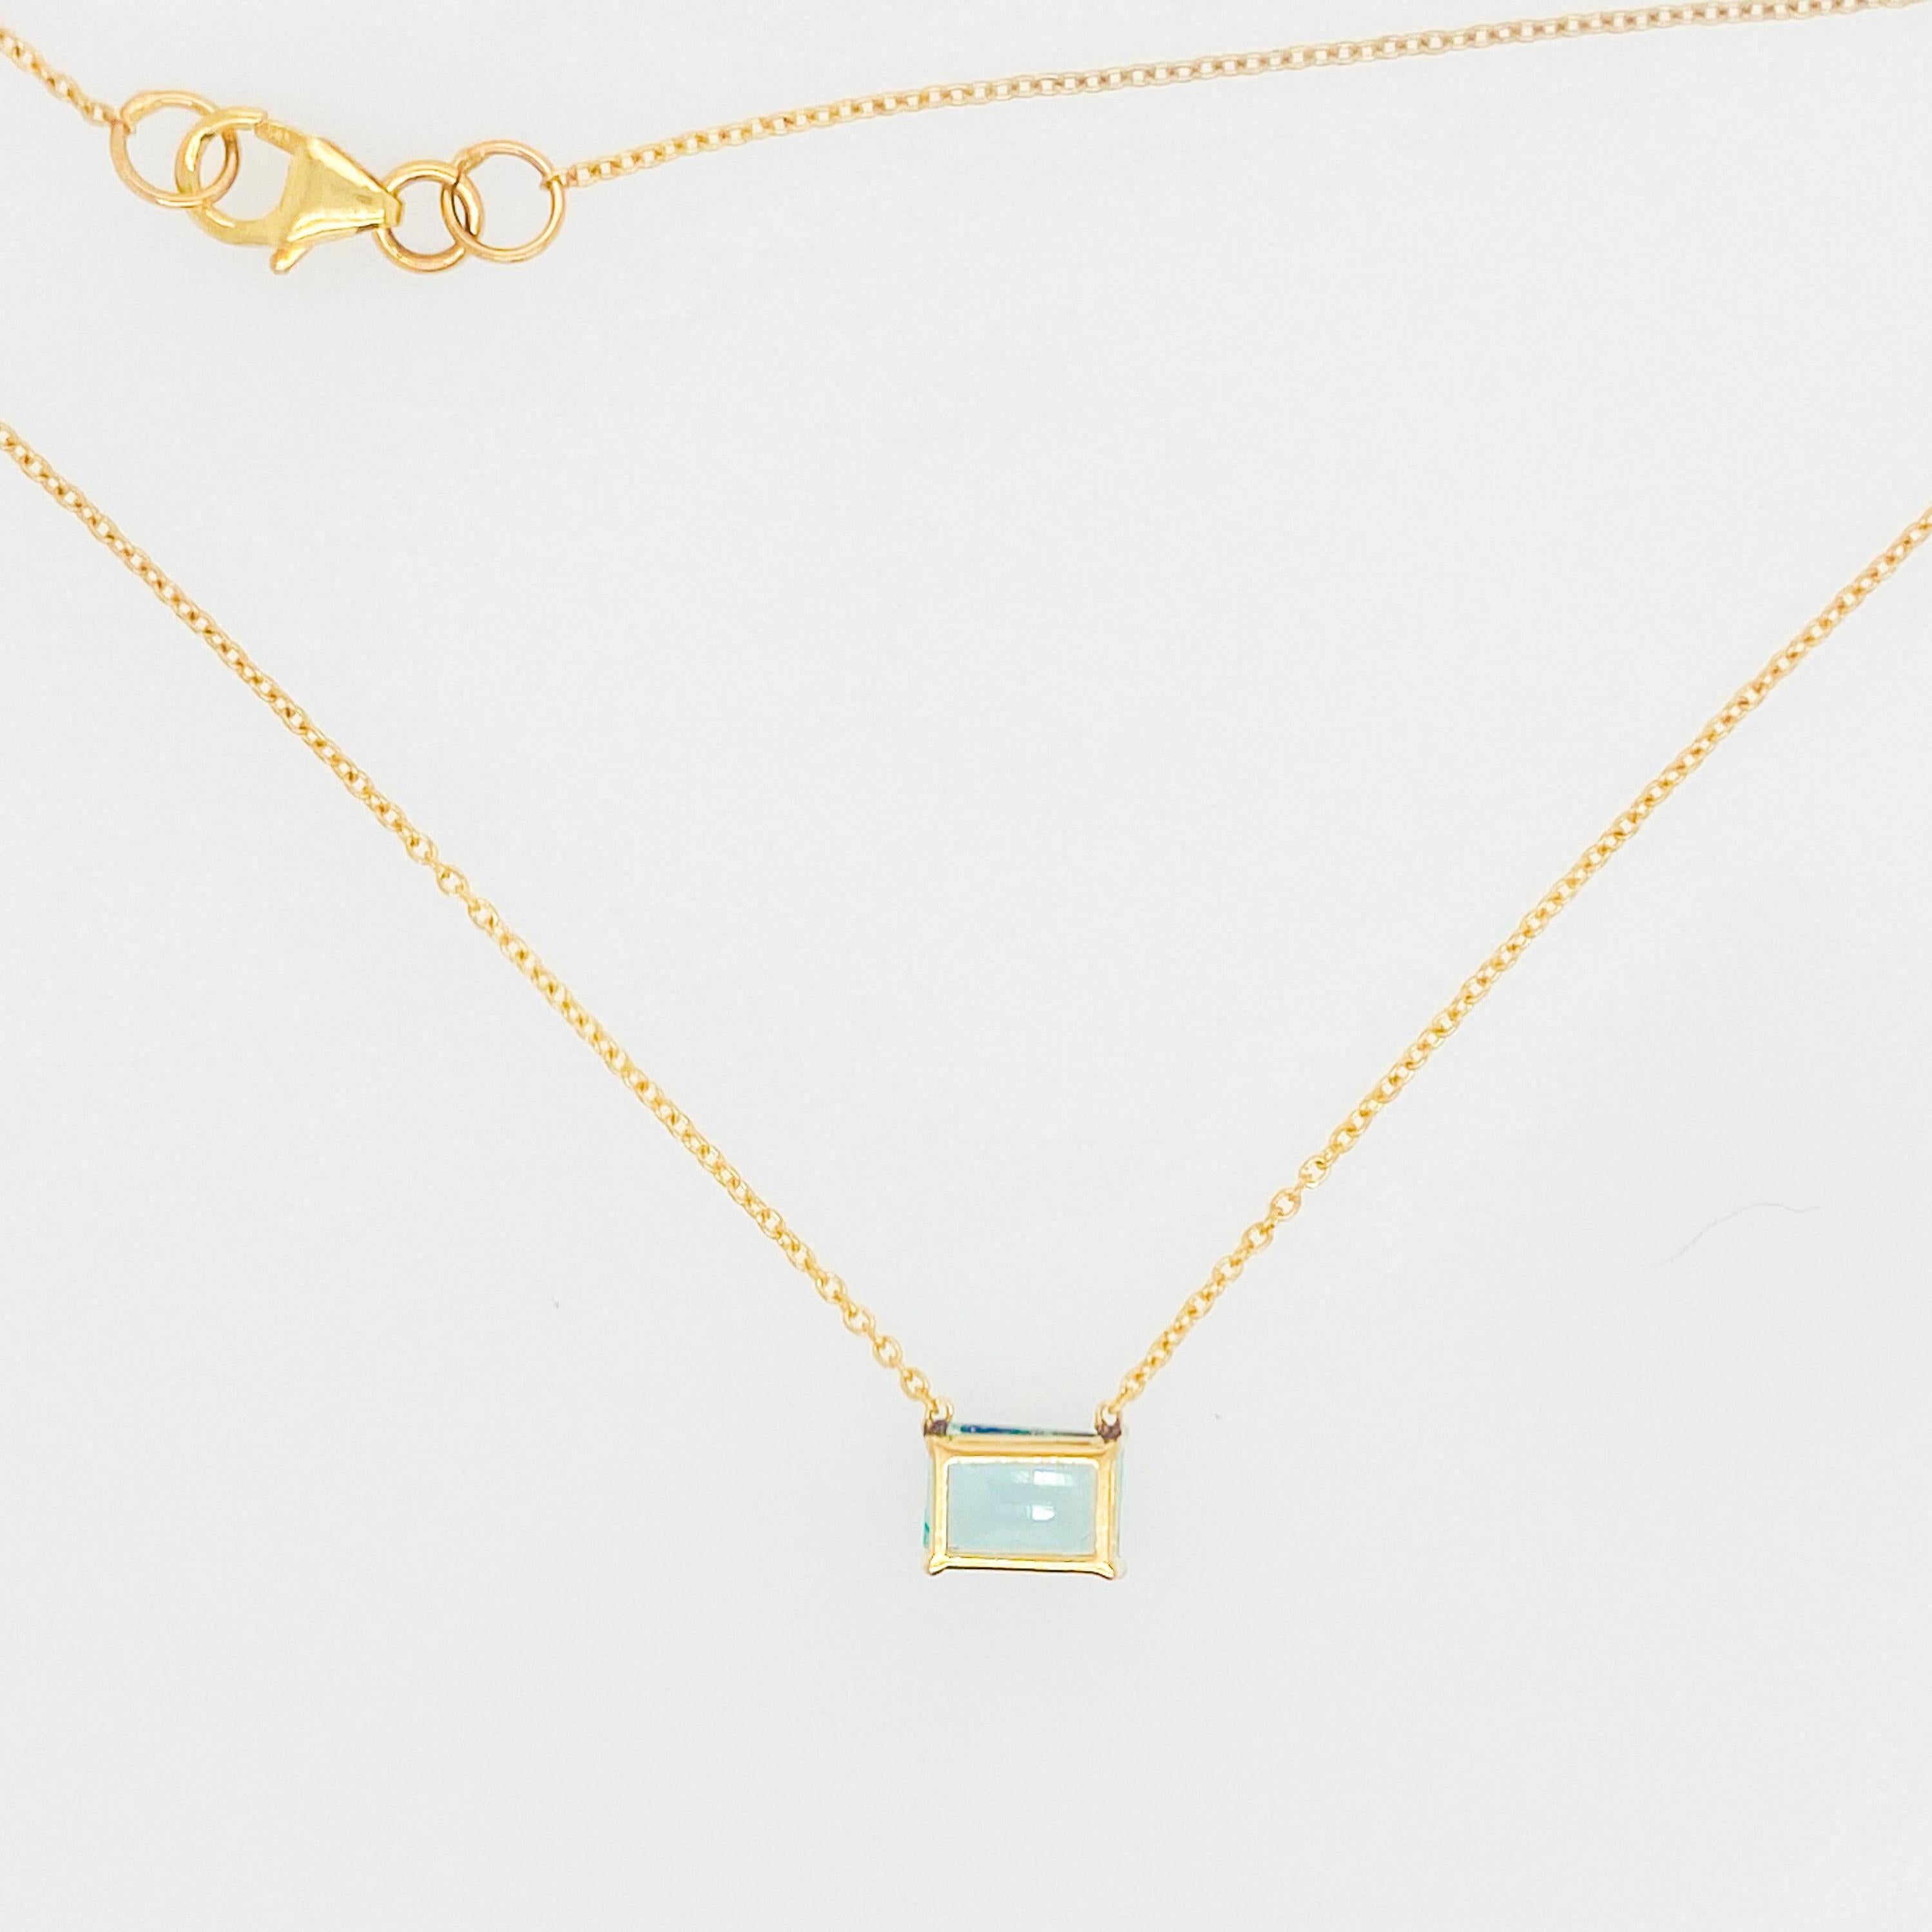 Blue Aquamarine is the most desirable color! Mined from a Brazil and one of the most desirable colors of blue! The necklace adjusts from 15 to 18 inches so it will fit almost every woman’s neck! You will love the color and the cut of the natural